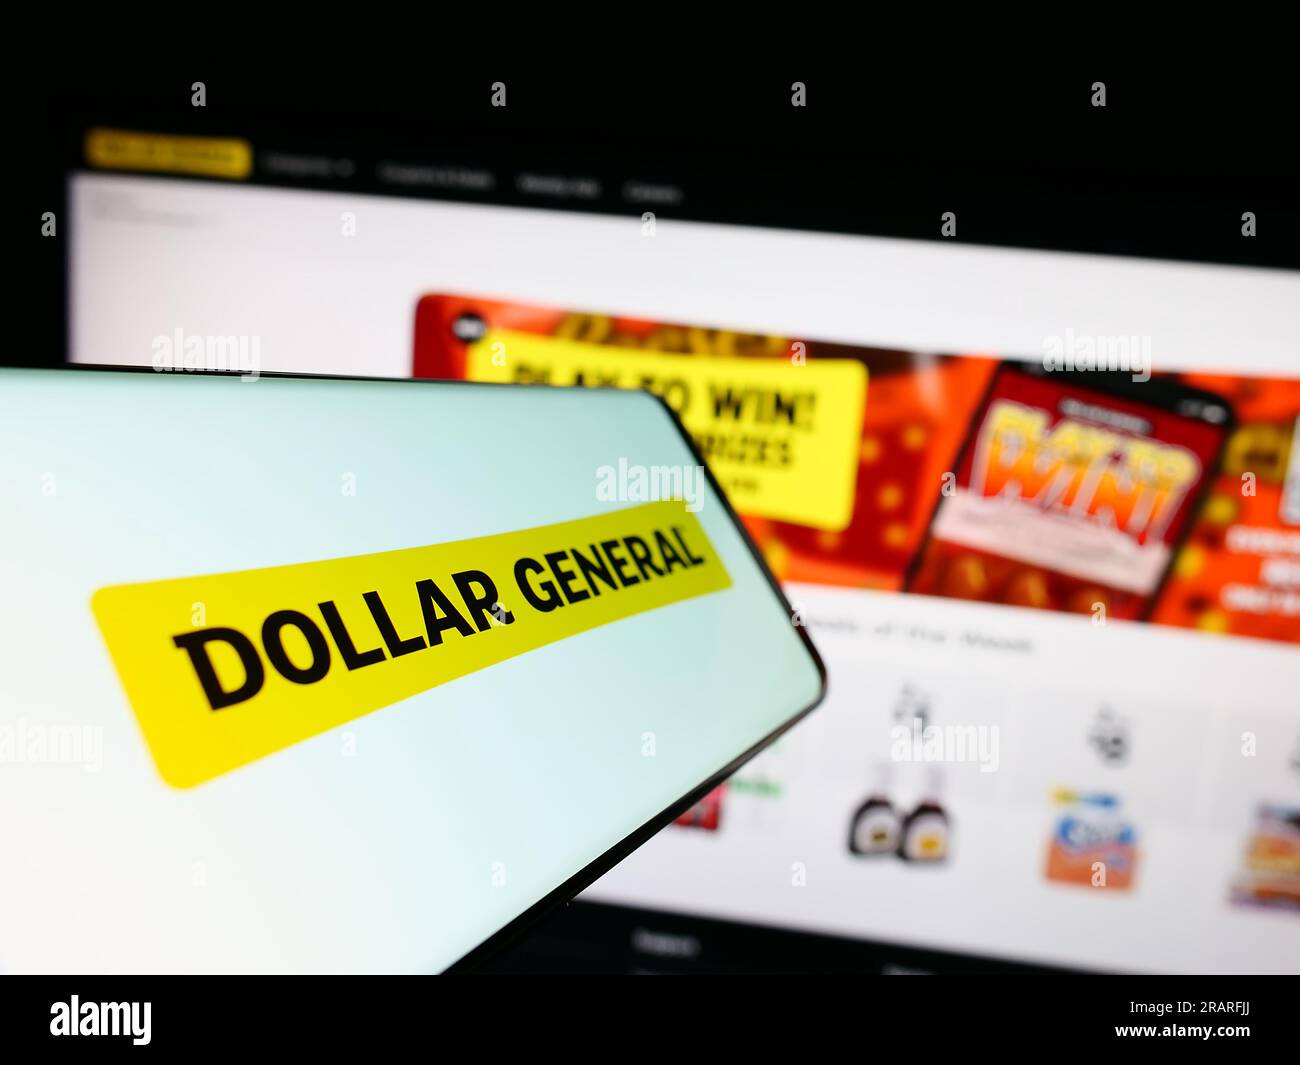 Cellphone with logo of American retail company Dollar General Corporation on screen in front of website. Focus on center-left of phone display. Stock Photo